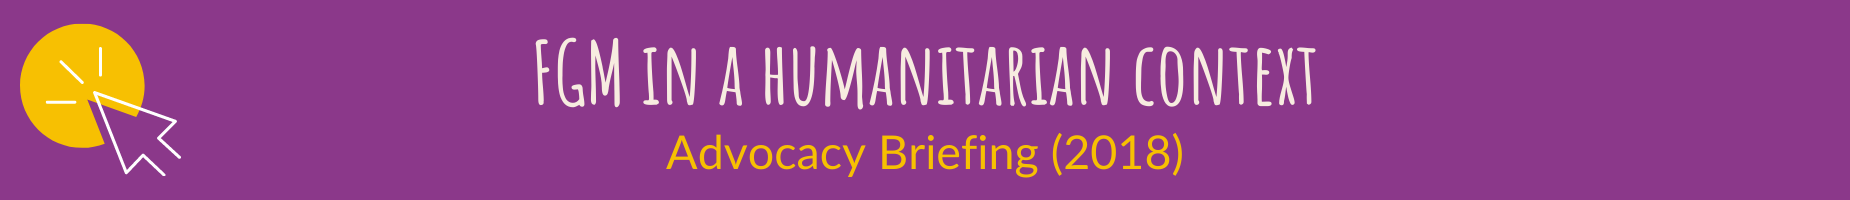 FGM in a humanitarian context - Advocacy Briefing (2018)